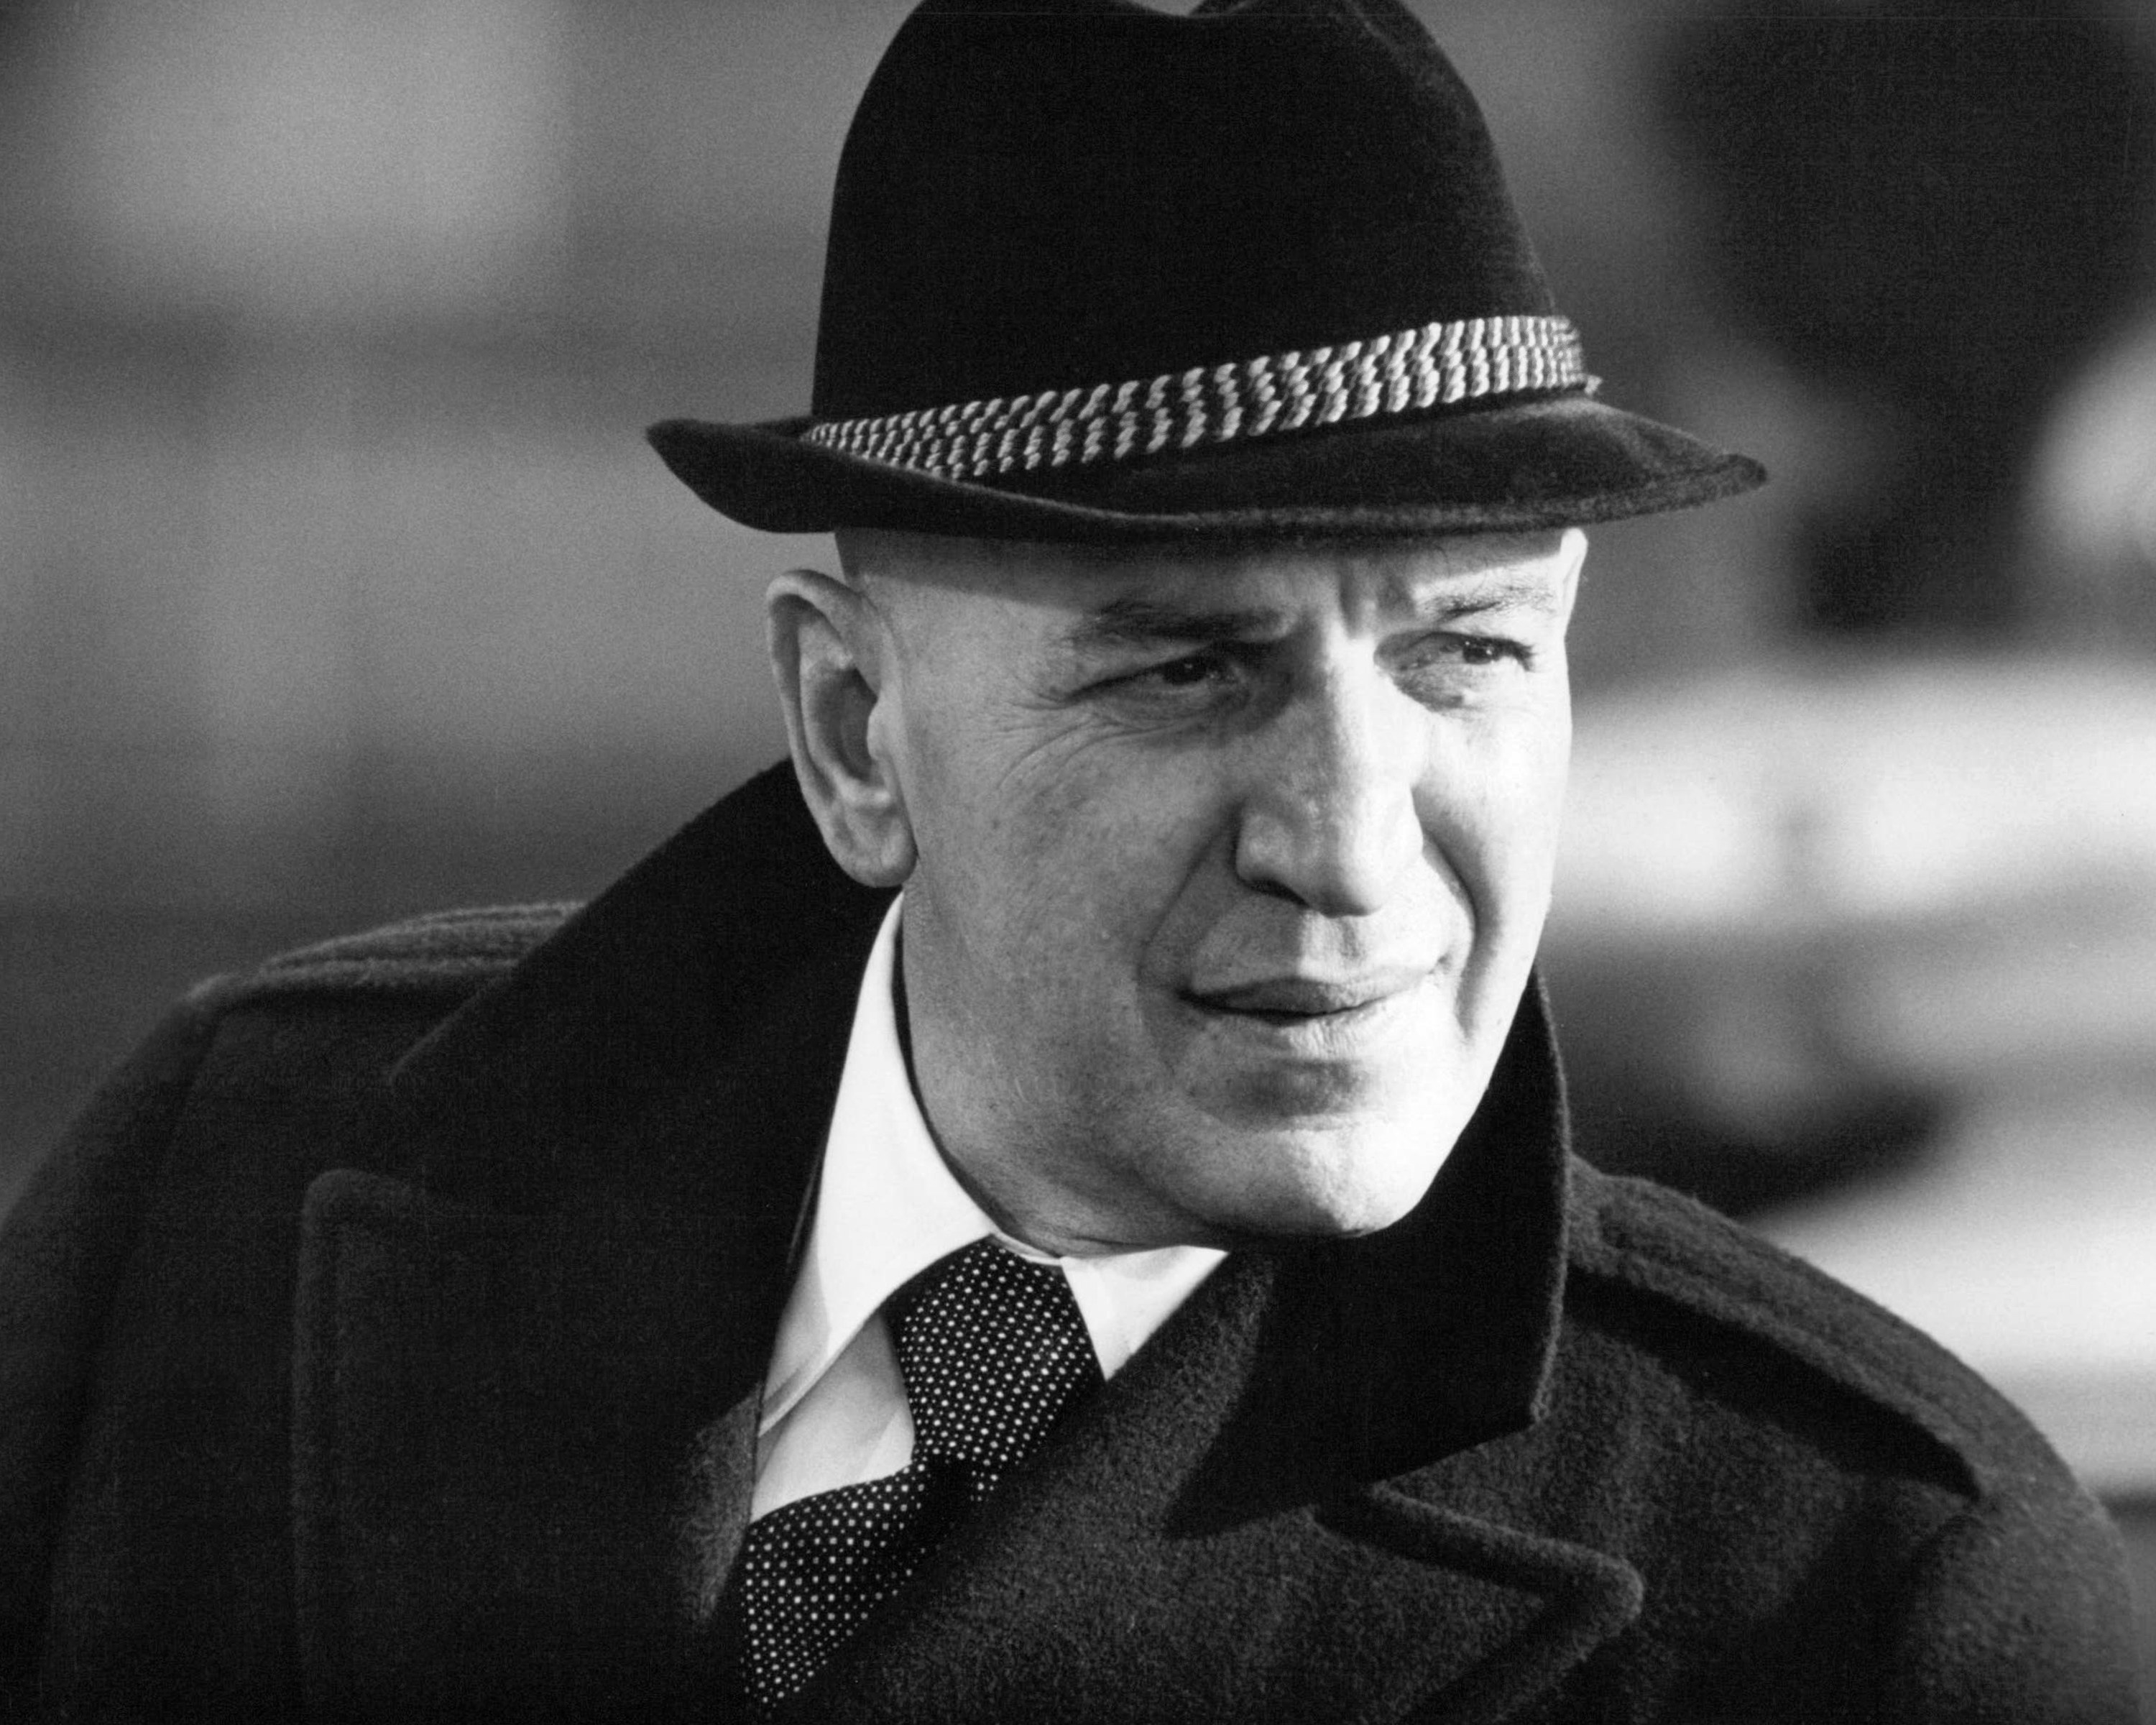 Black-and-white photo of Telly Savalas wearing a hat